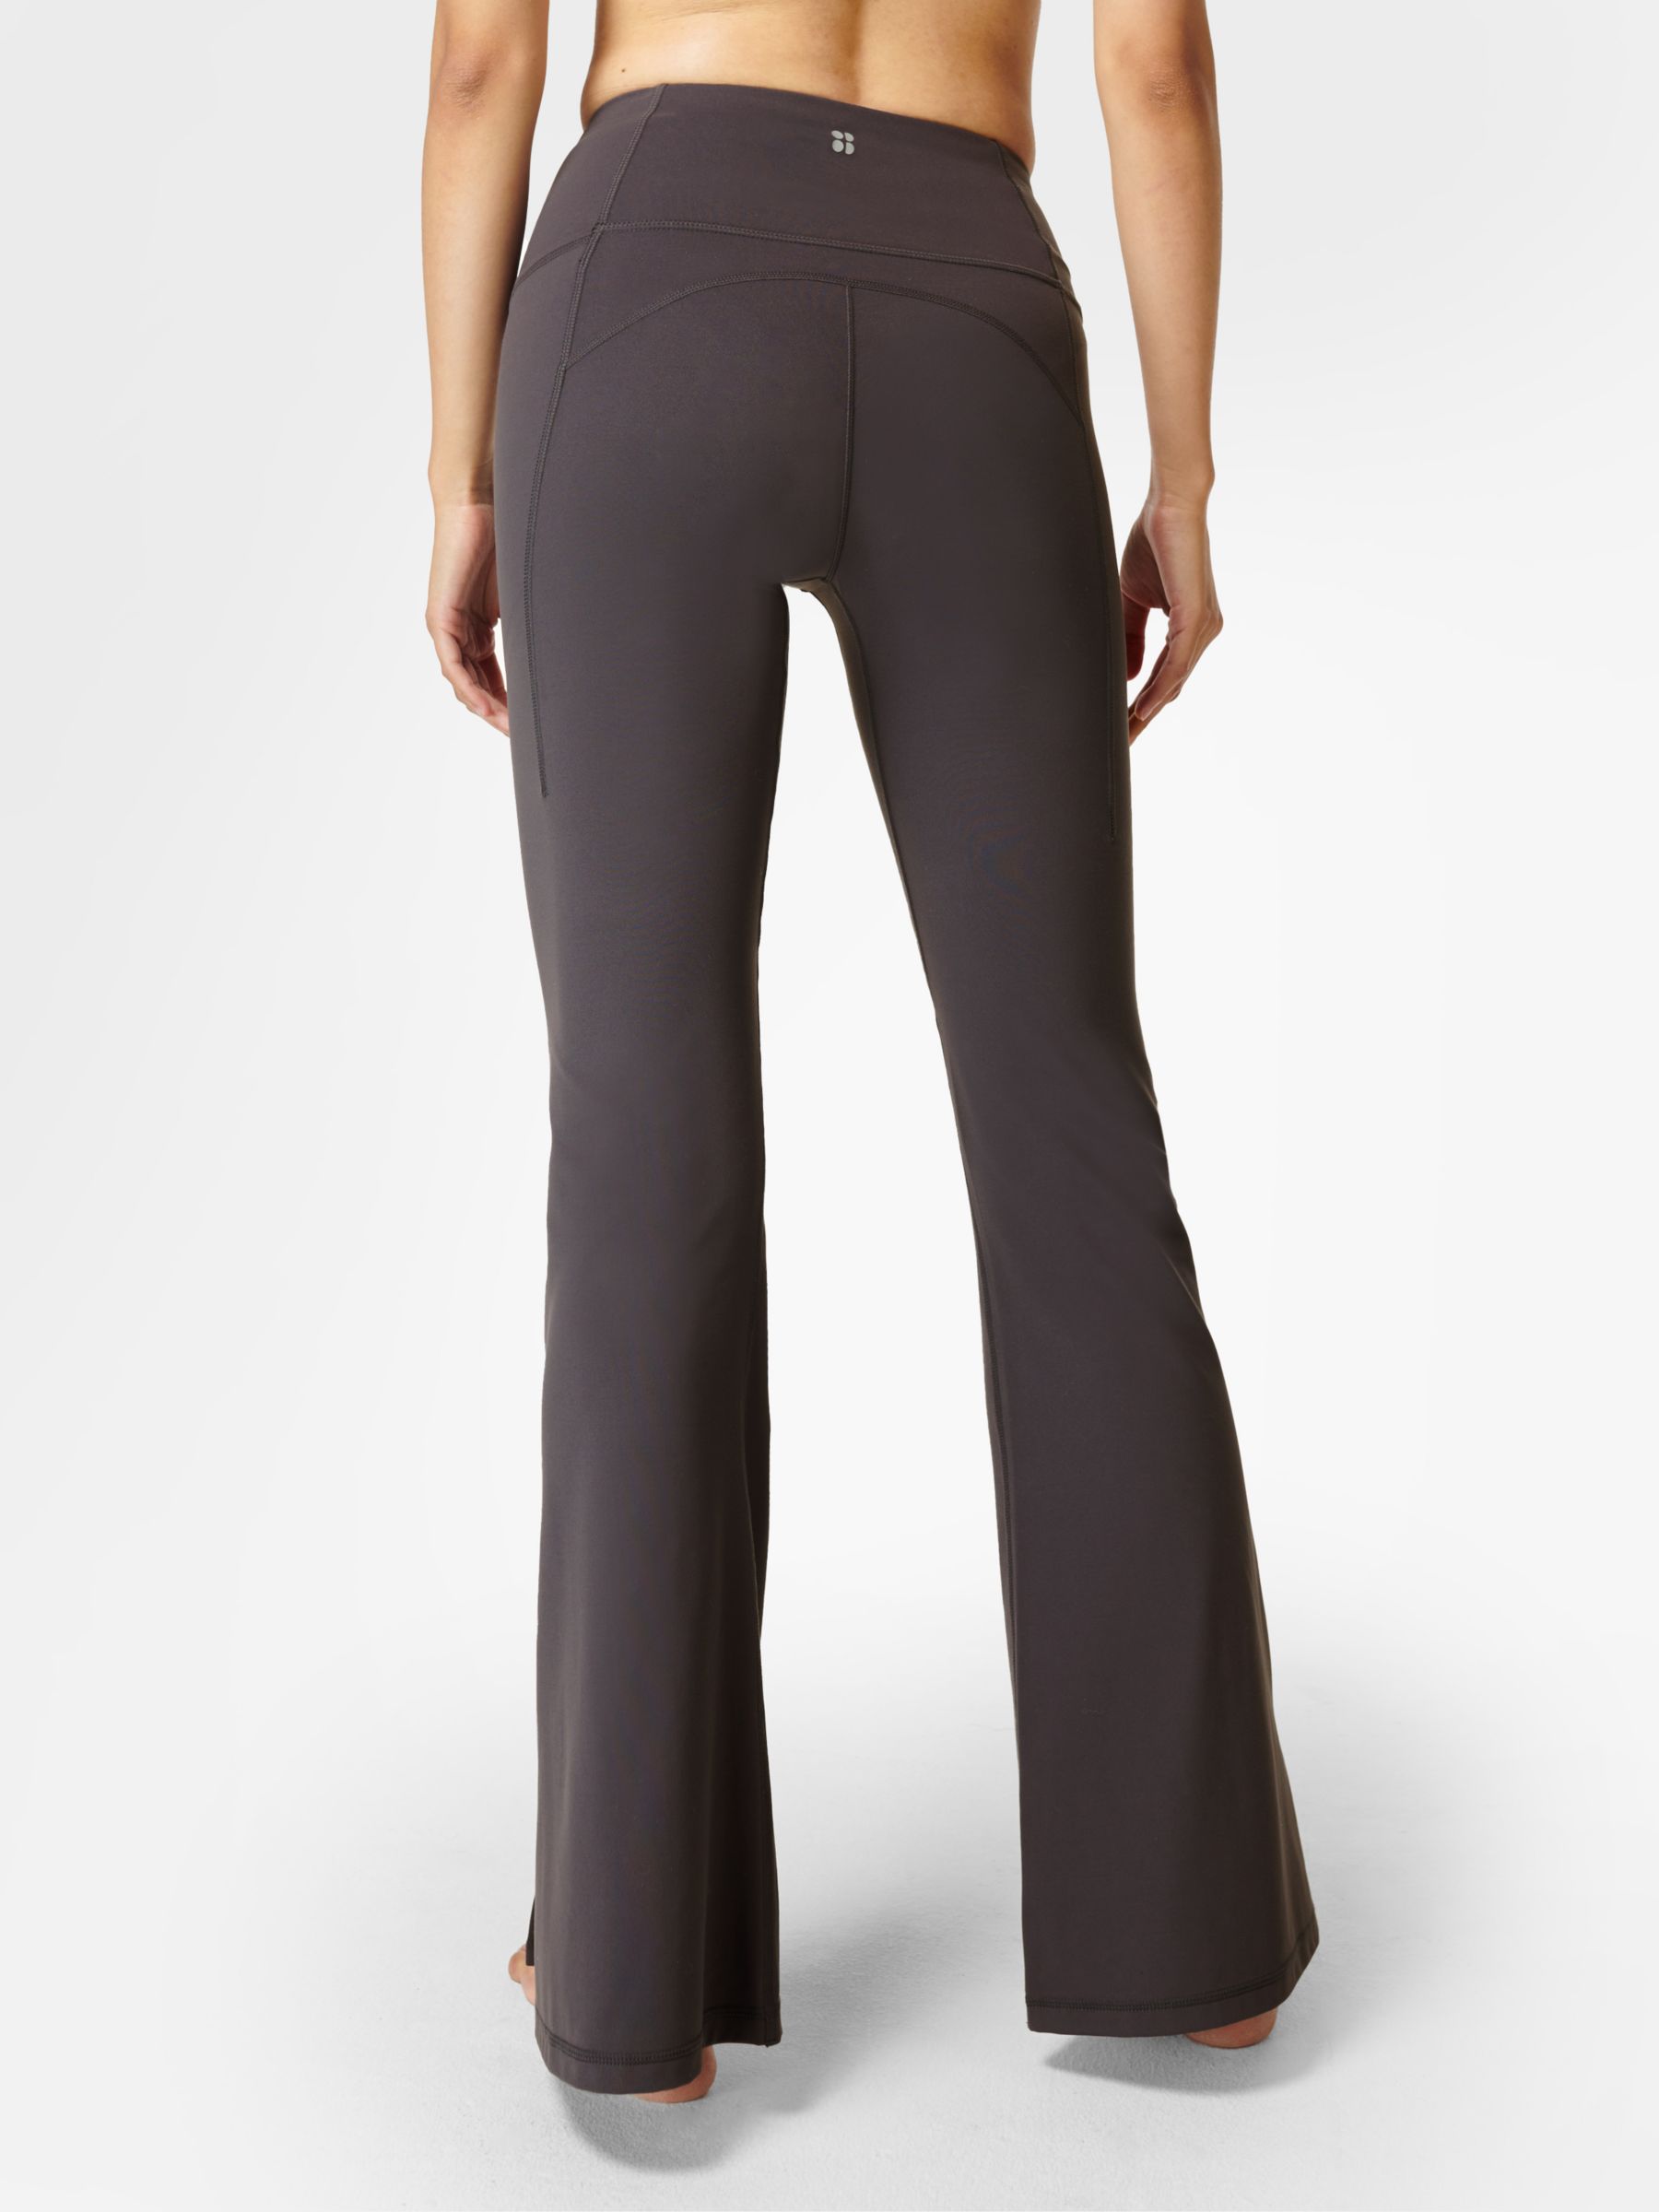 Buy Sweaty Betty Super Soft 32" Flare Yoga Trousers Online at johnlewis.com